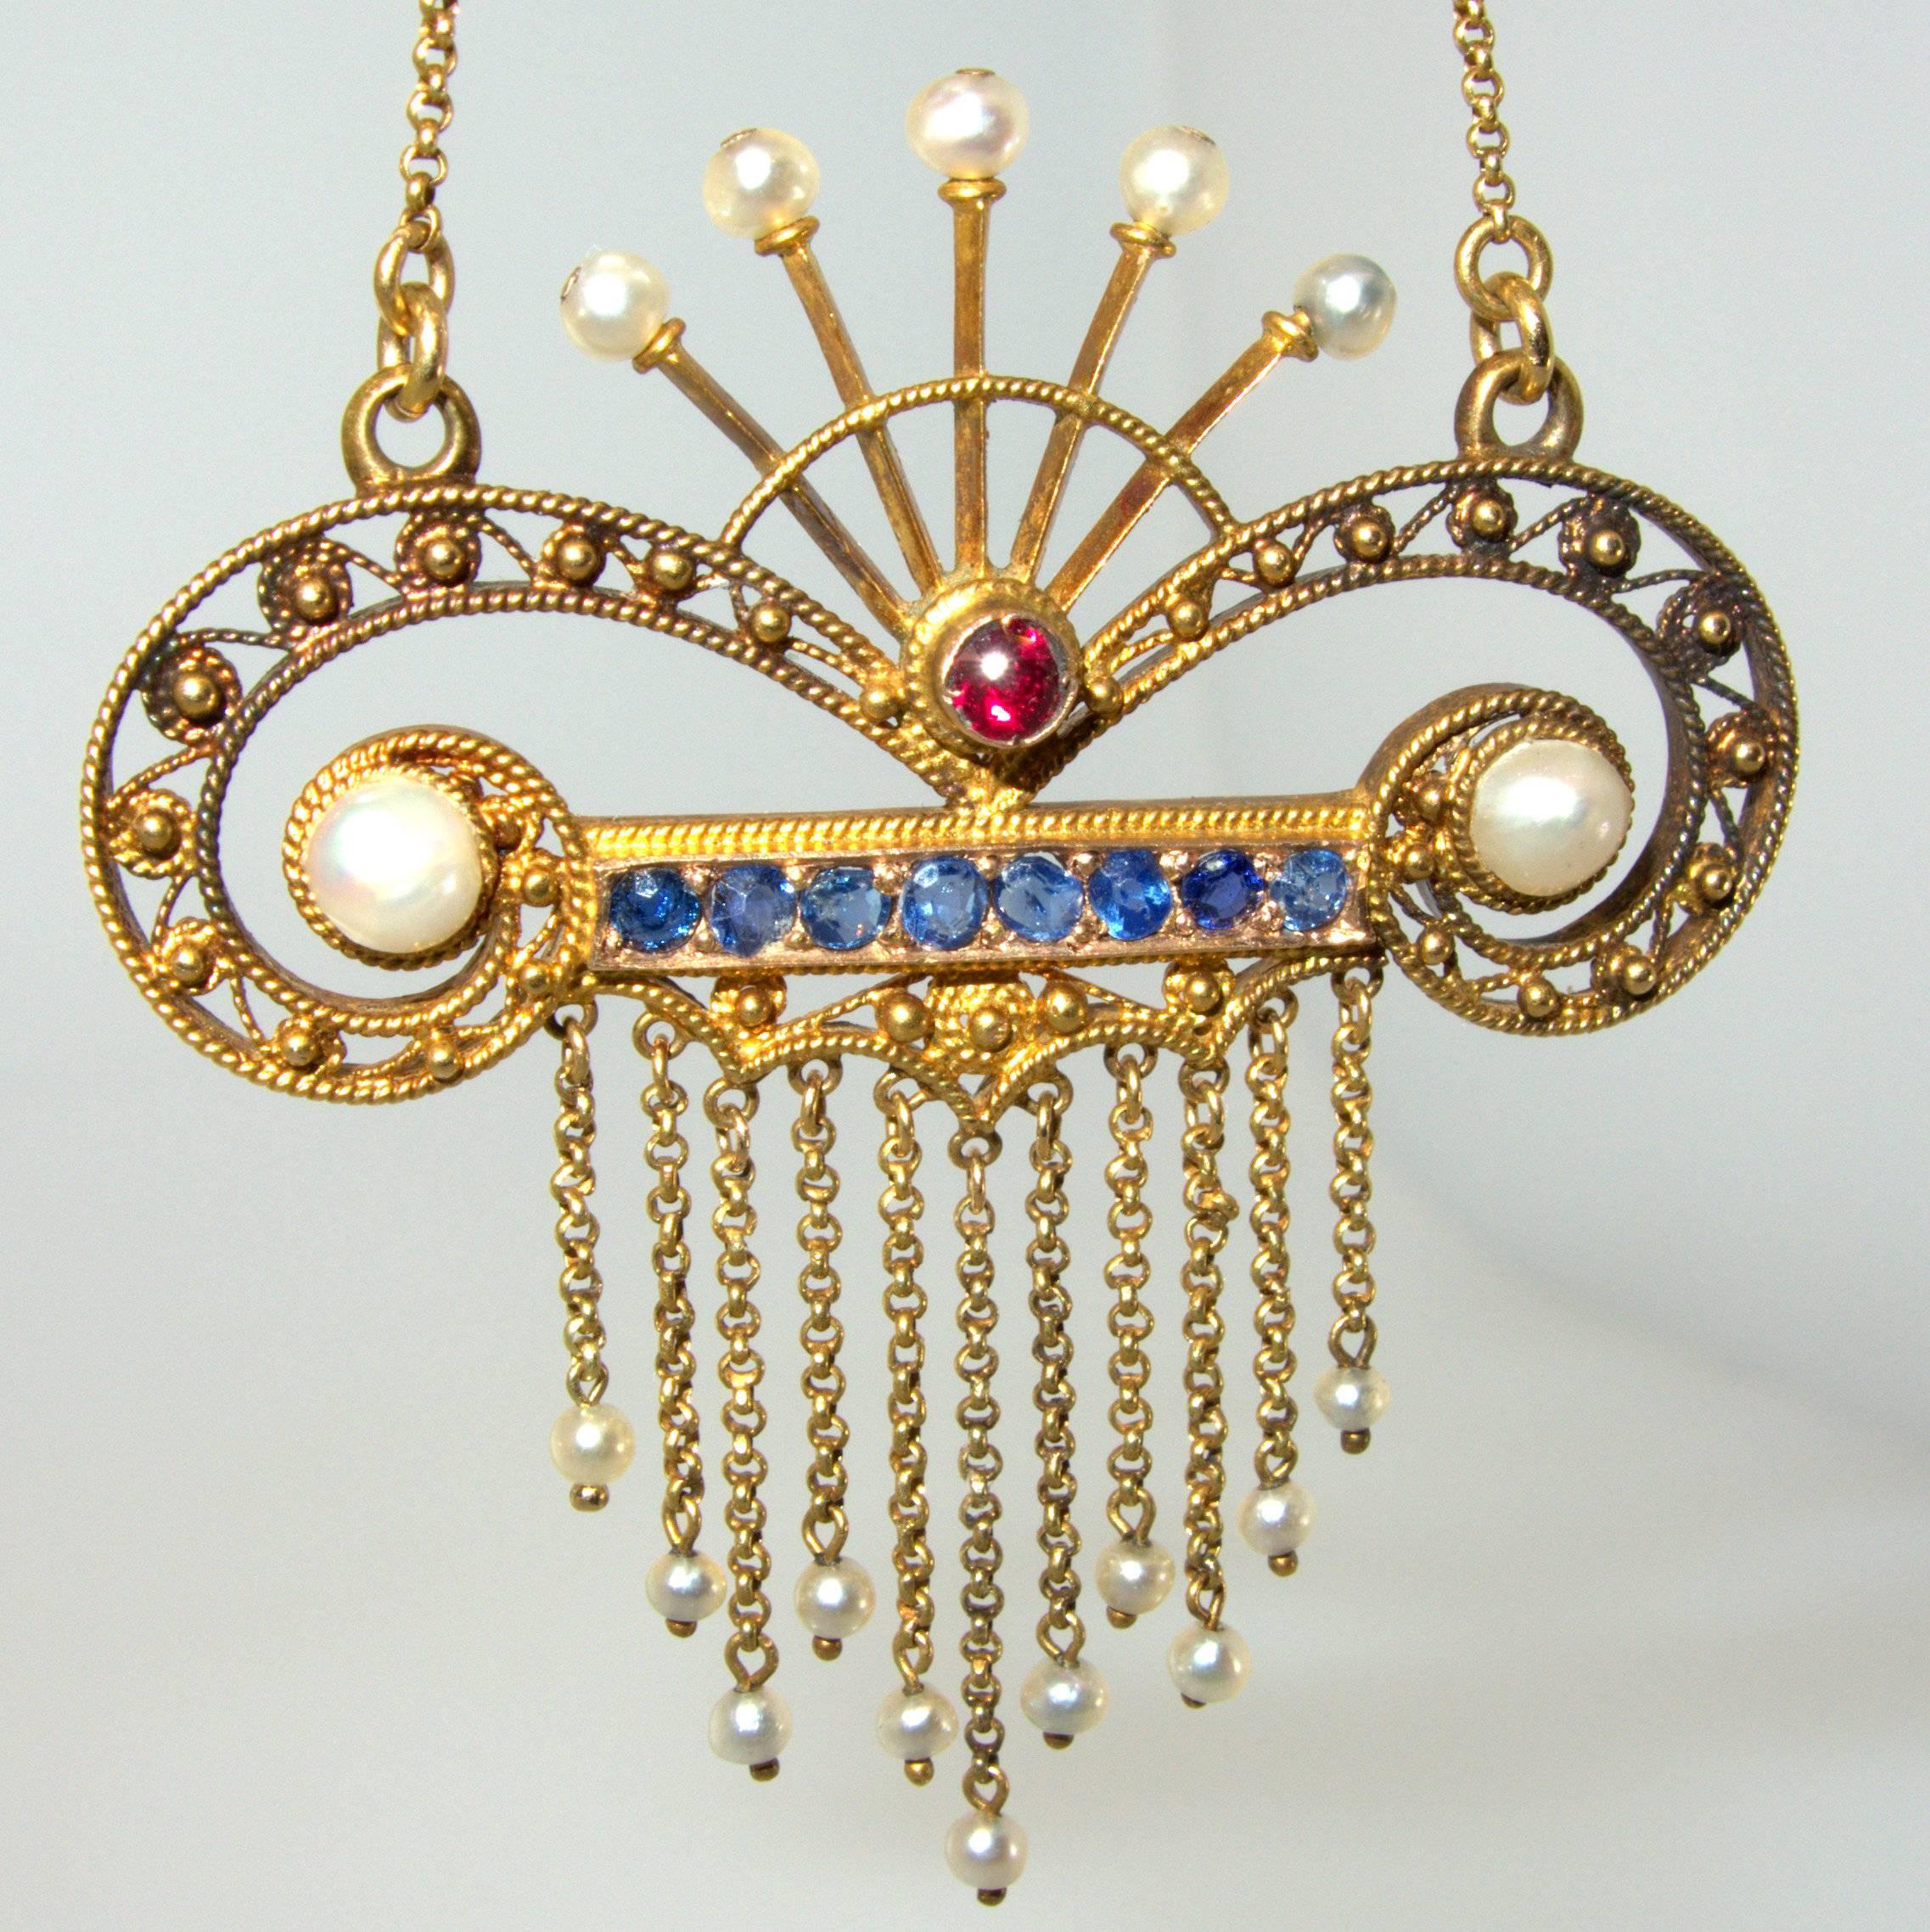 Circa 1900, with natural seed pearls, Ceylon sapphires and centering a ruby, this unusual pendant is two inches long and suspends from a 16 inch chain making the necklace 18 inches long.